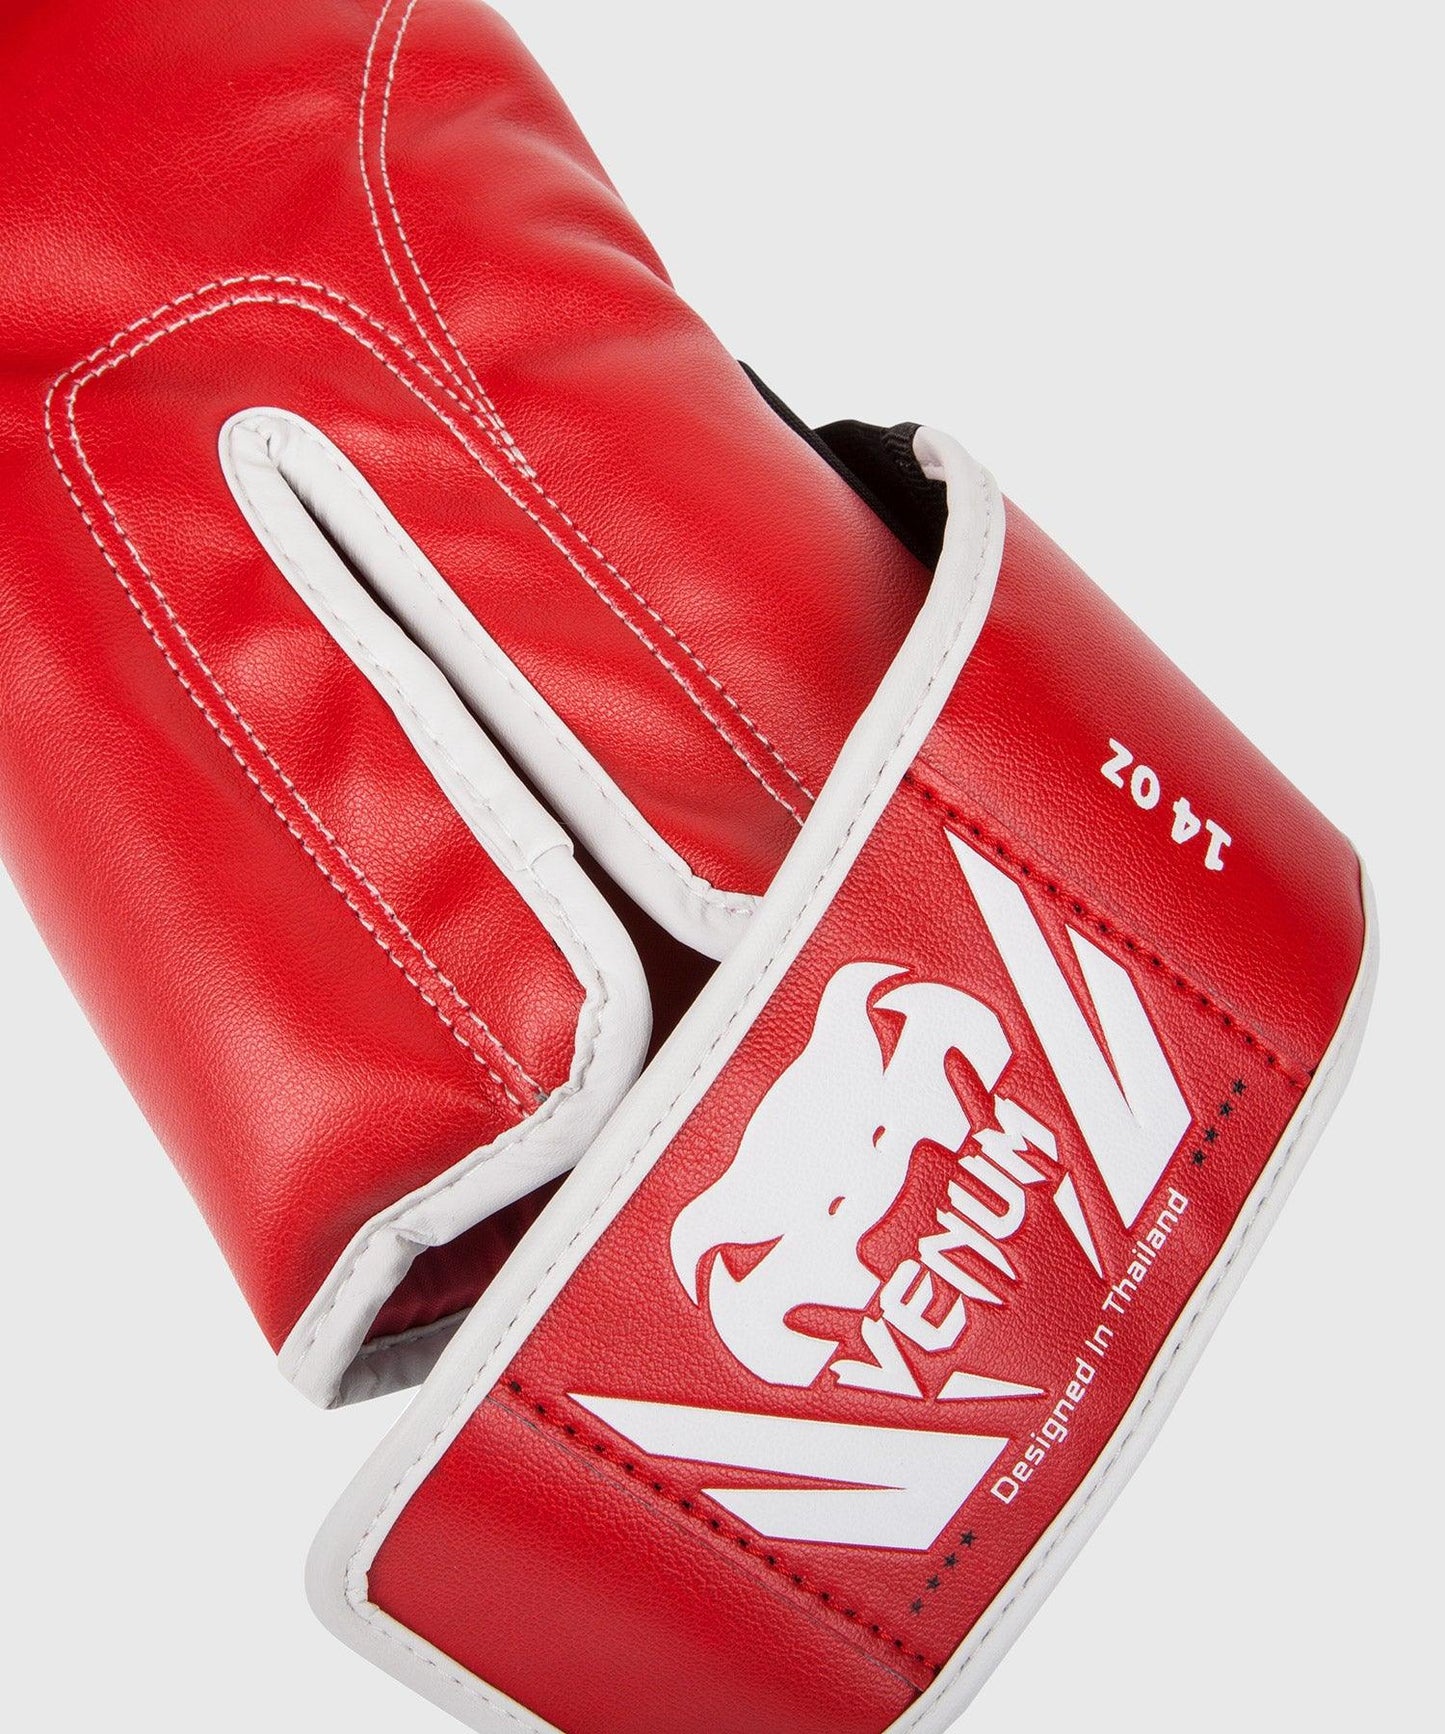 Venum Challenger 2.0 Boxing Gloves - Red Picture 5